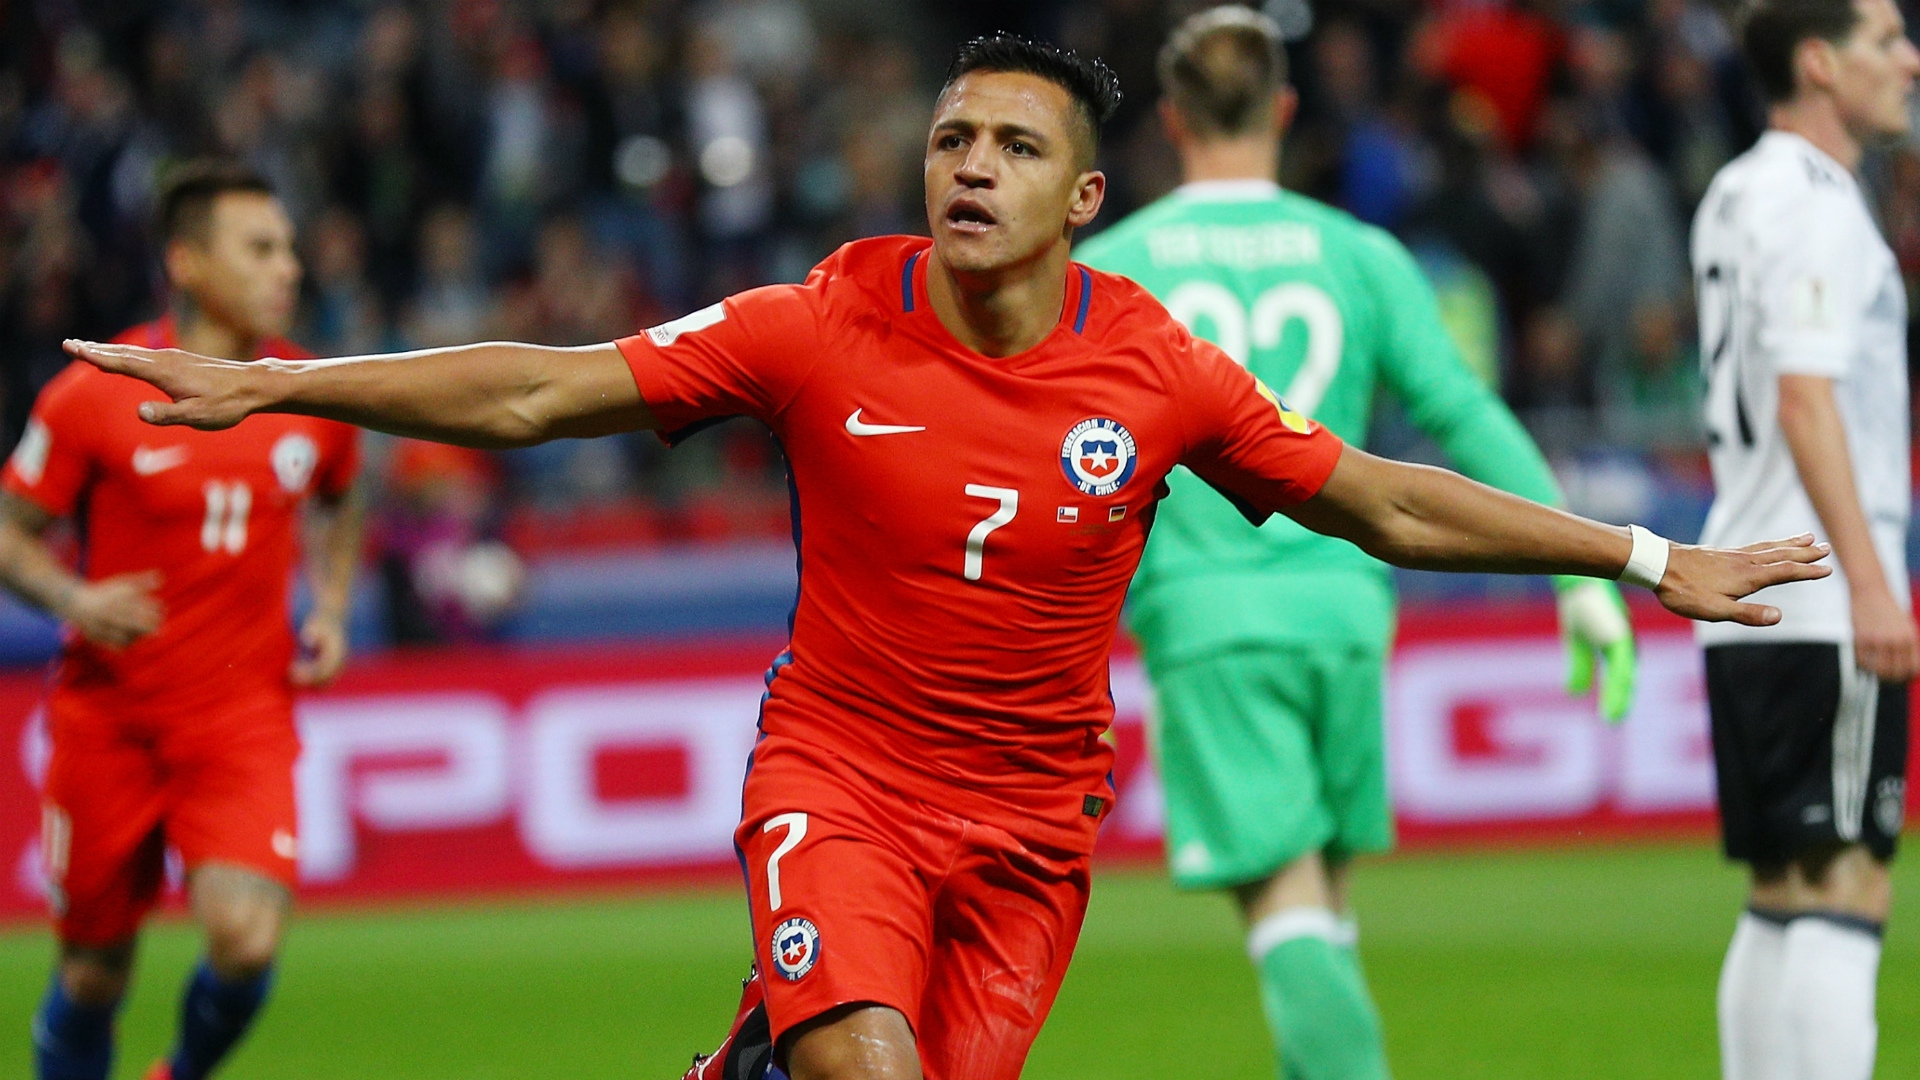 Alexis Sanchez, viewed as one of Premier League's top players, is entering his last year of his contract with Arsenal and has, thus far, not signed an extension.